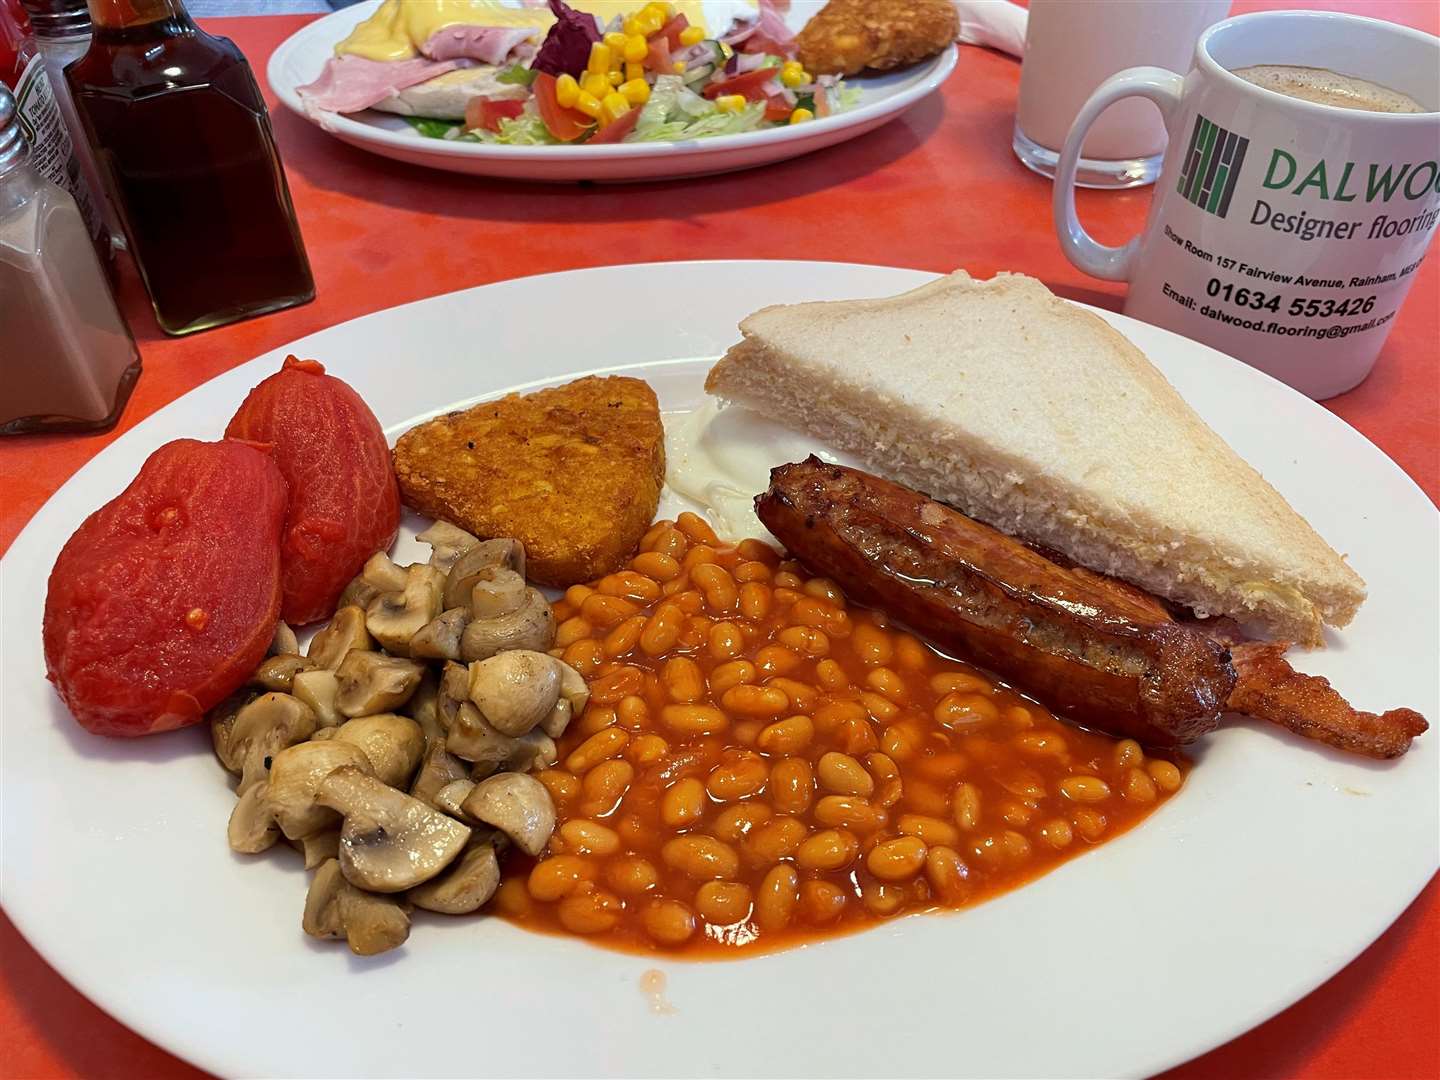 Reviewer Claire McWethy sampled breakfast at the Tuck Inn in Newington